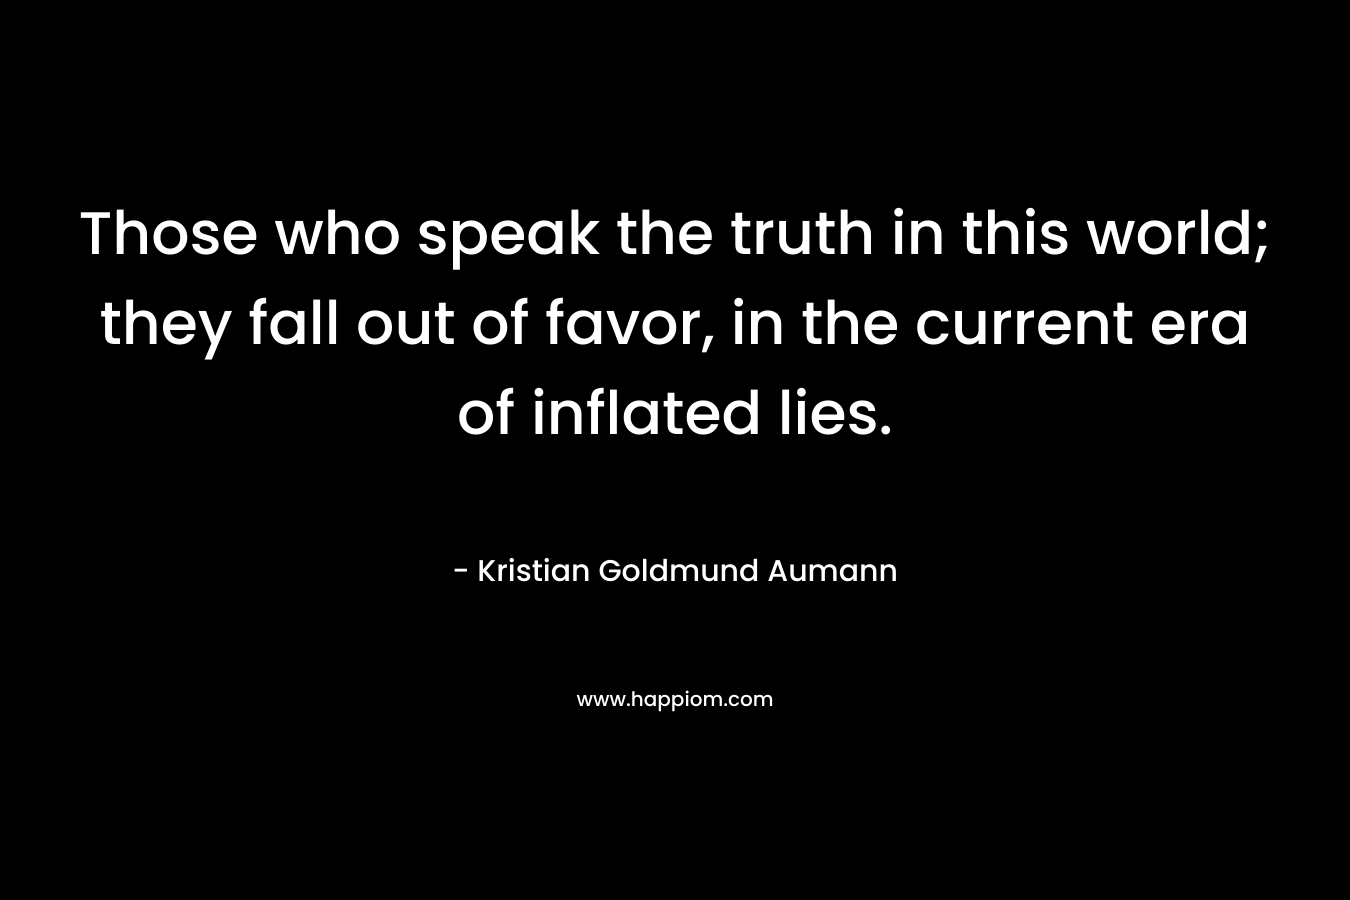 Those who speak the truth in this world; they fall out of favor, in the current era of inflated lies. – Kristian Goldmund Aumann